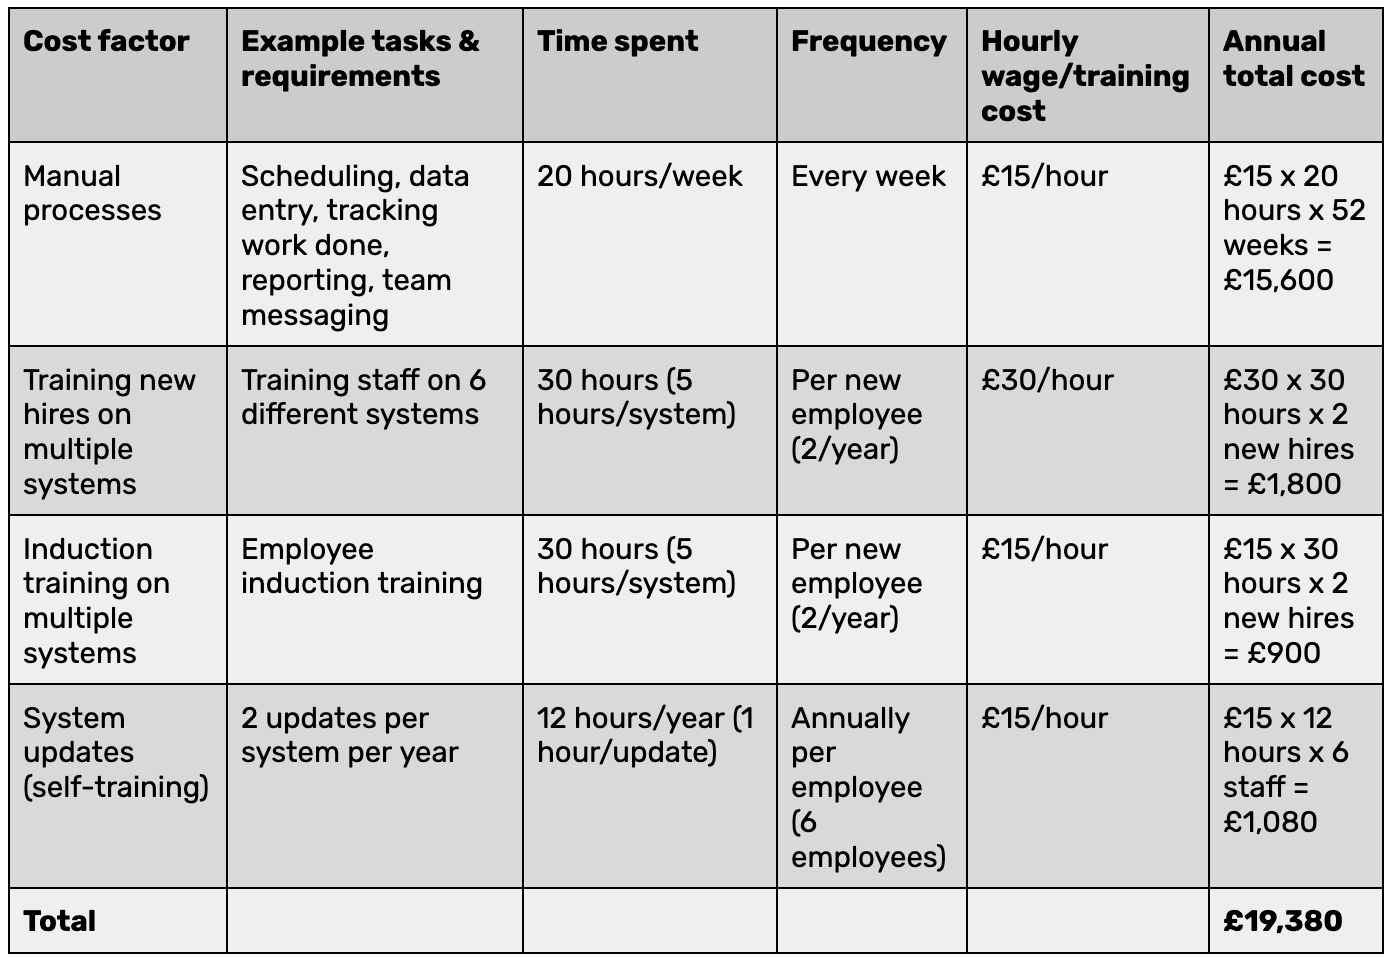 Table showing estimated staffing costs across different areas of a property management business